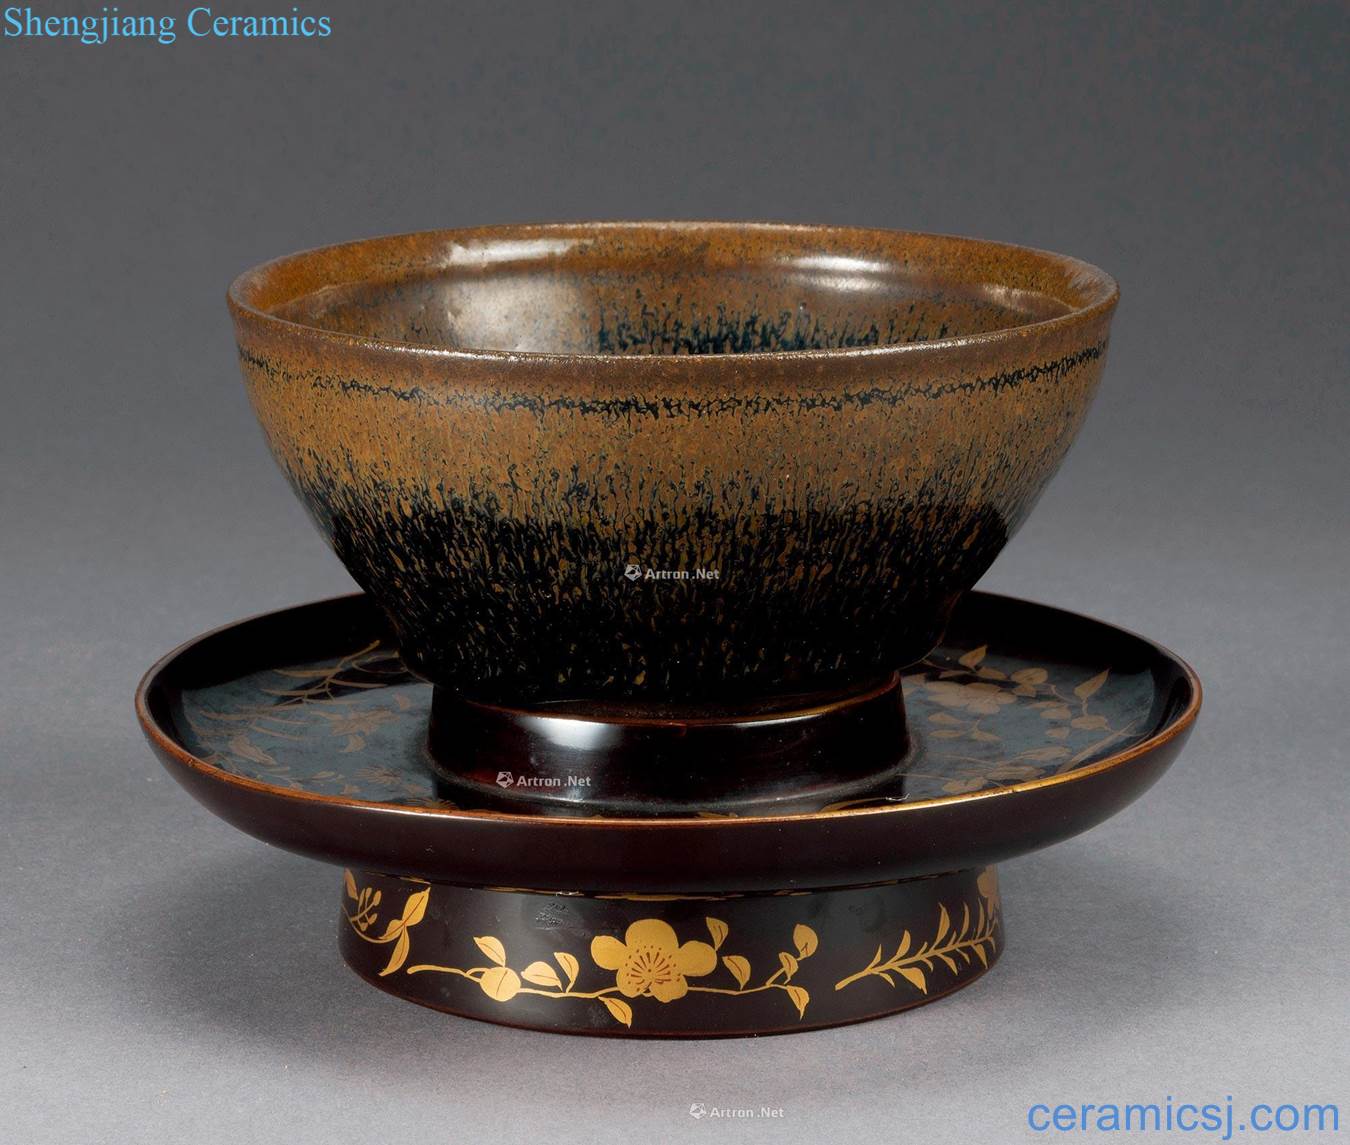 The song dynasty To build kilns temmoku bowl attached to the table